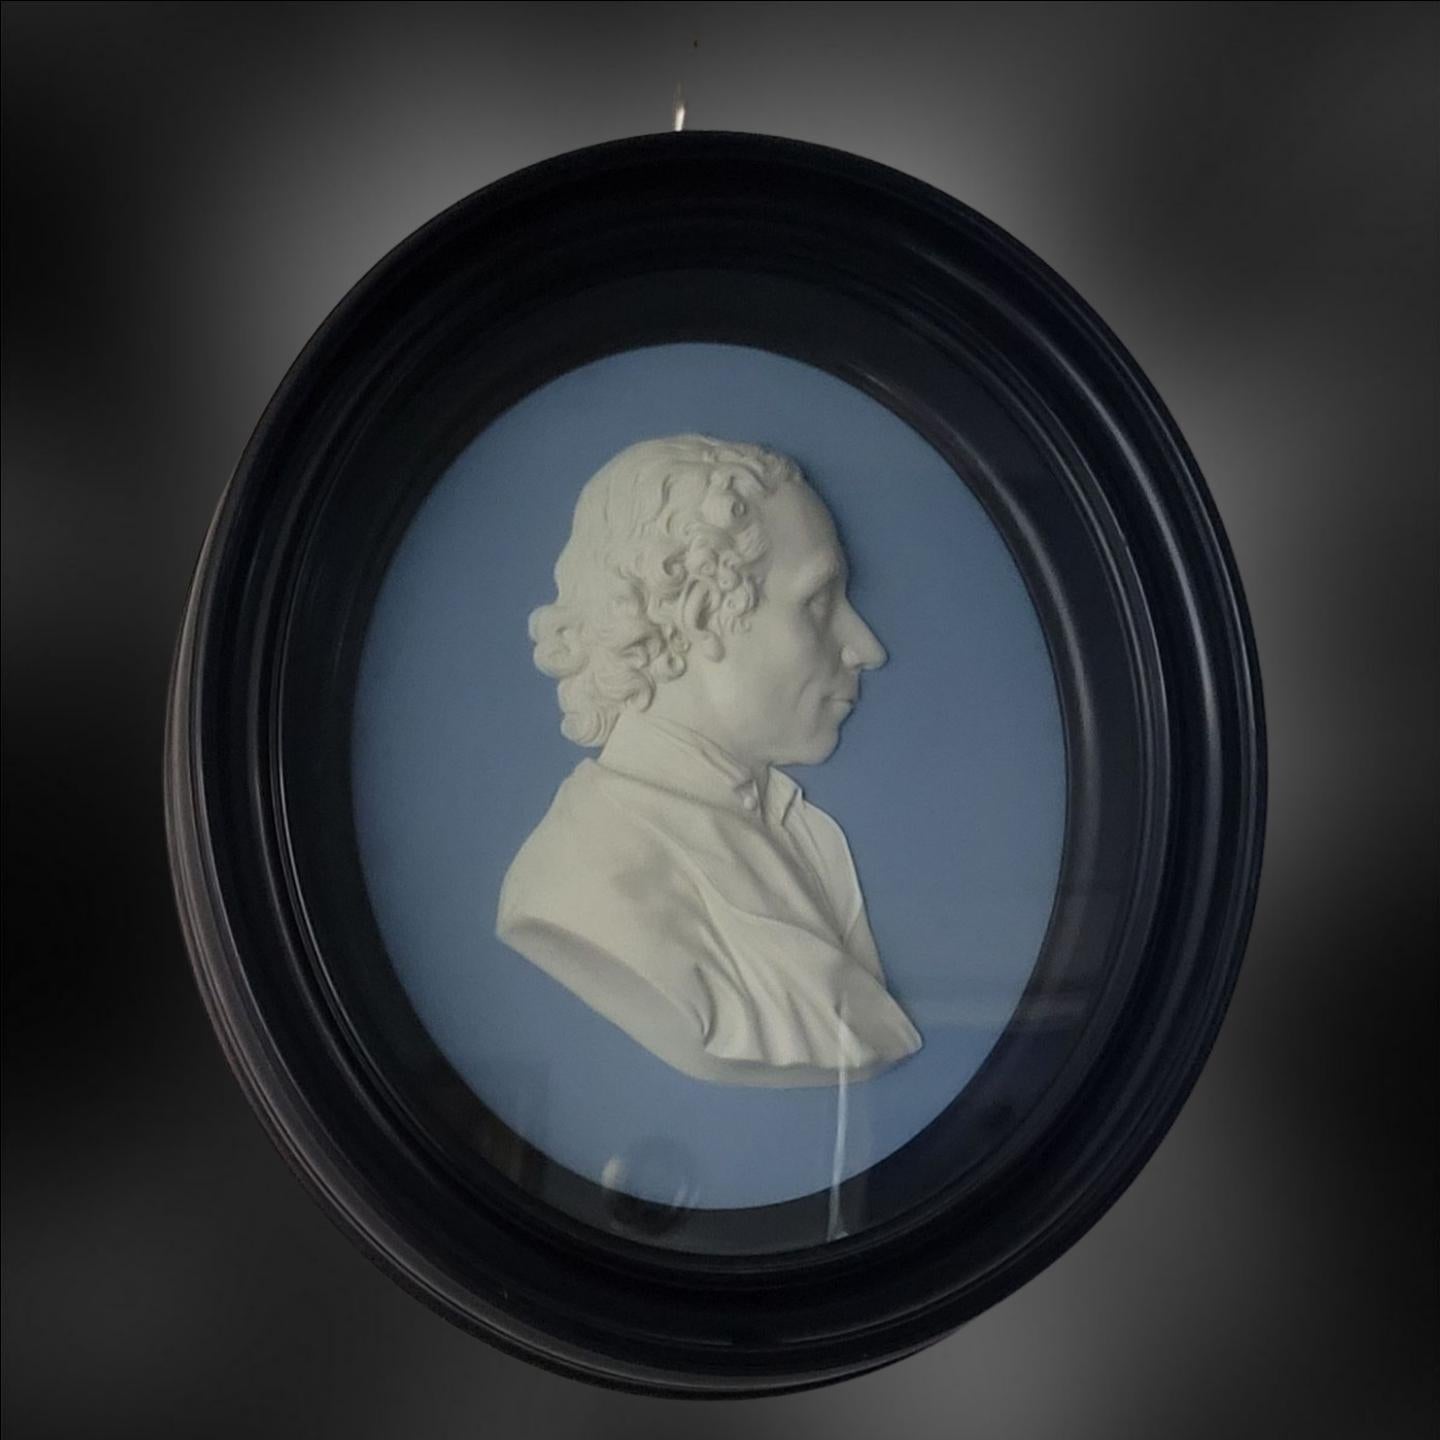 Fabulously large and fine example of the work of the well-known decorator Bert Bentley. Very few portrait medallions of this size were made, in all the time that Wedgwood has been making portrait medallions.

Priestly's advocacy for free speech